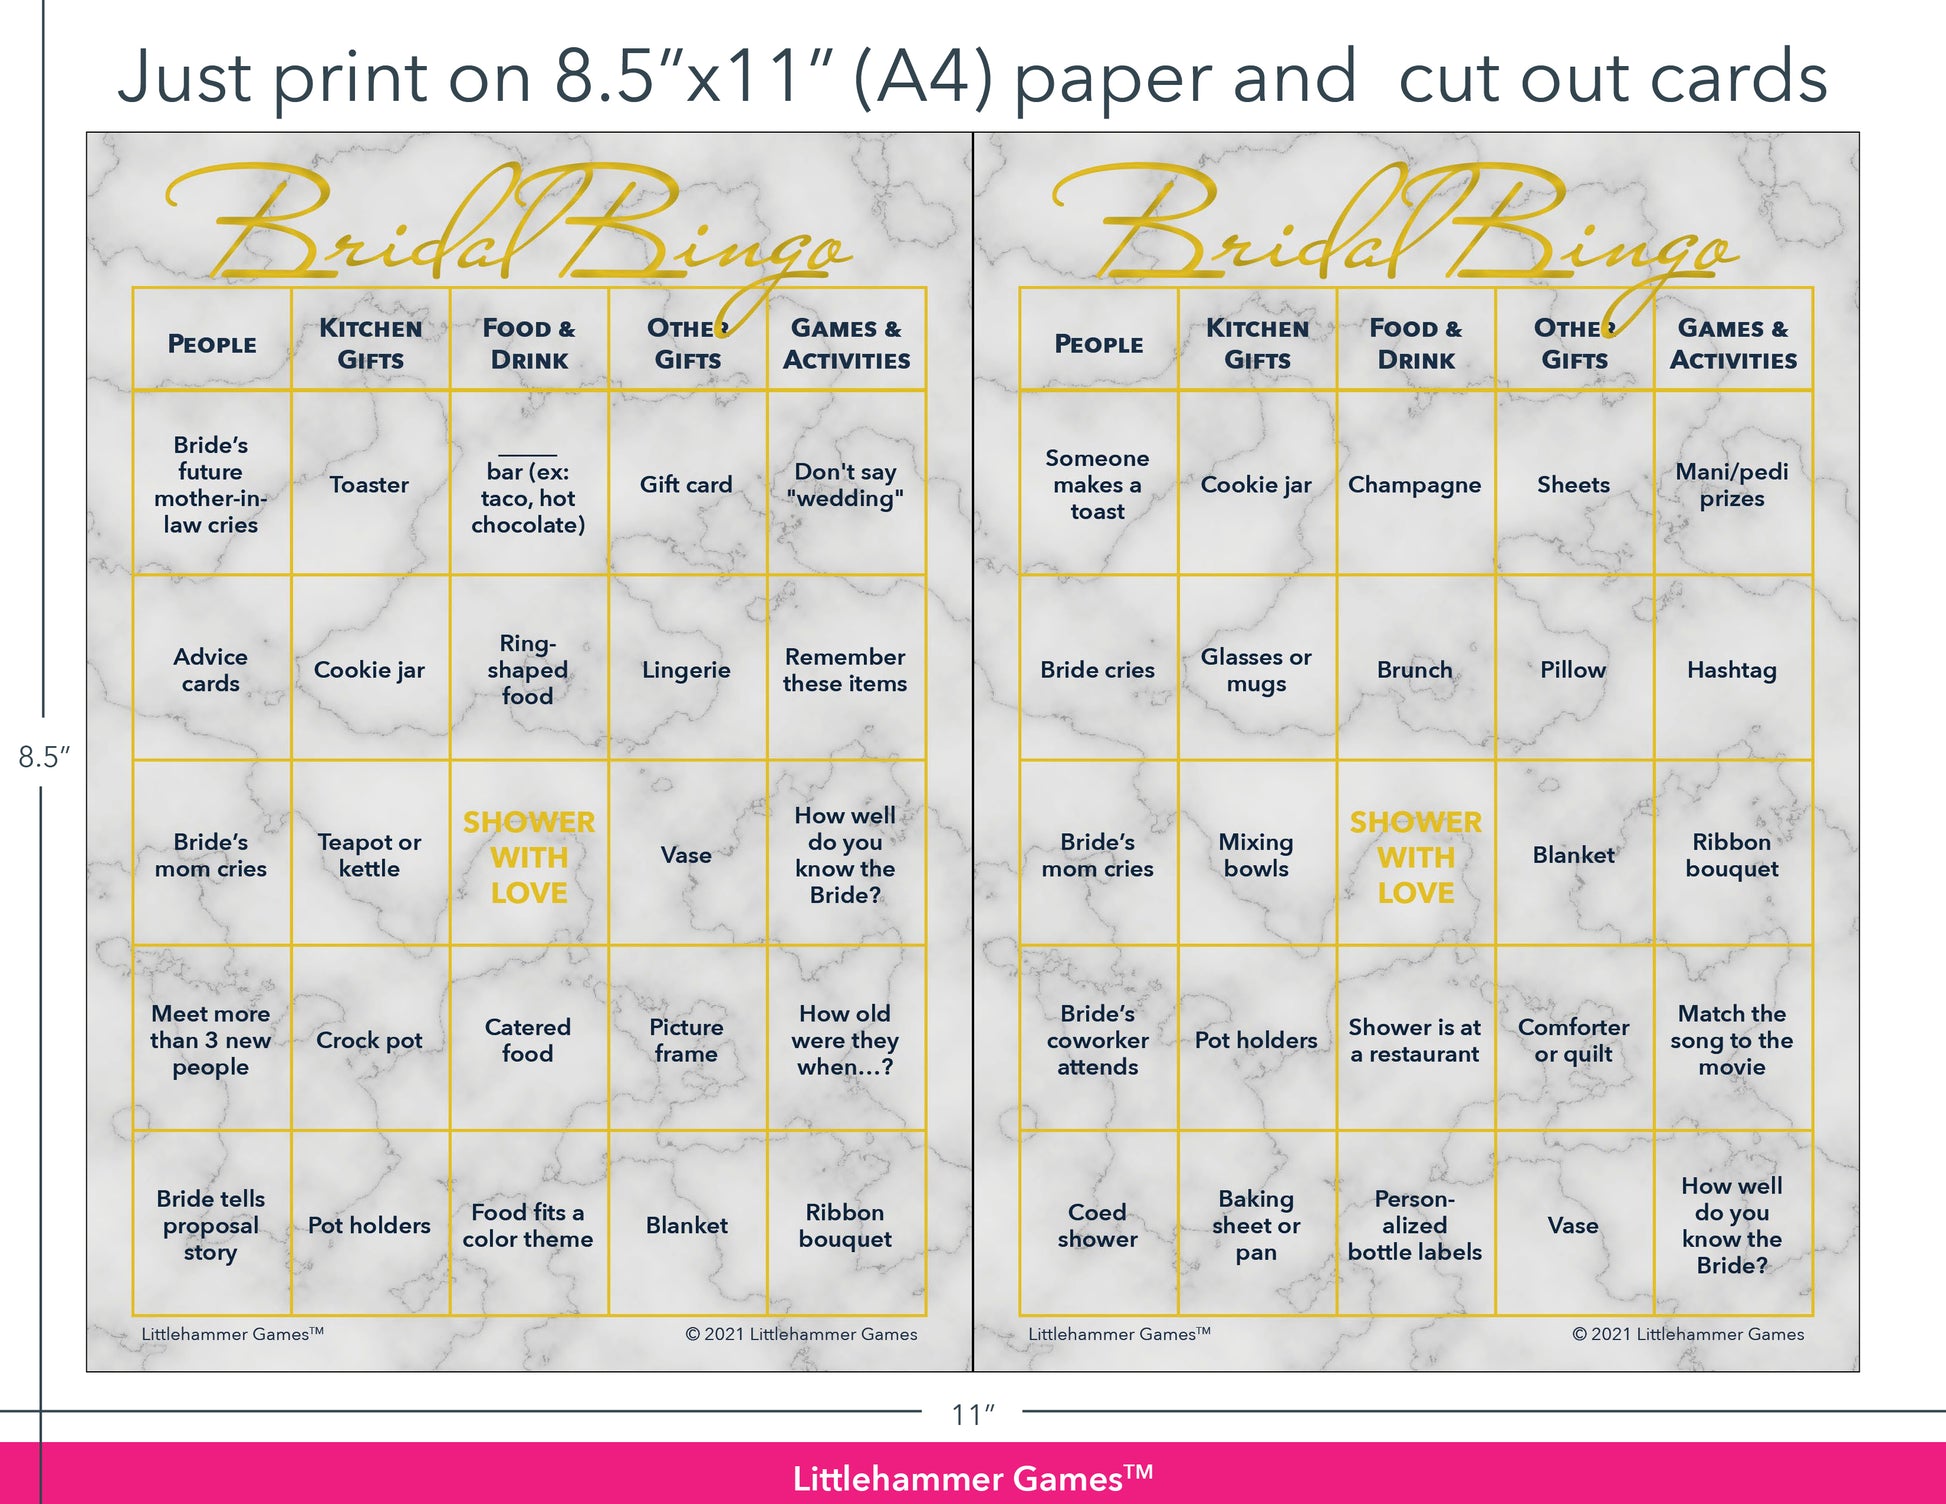 Gold and marble Bridal Bingo game cards with printing instructions